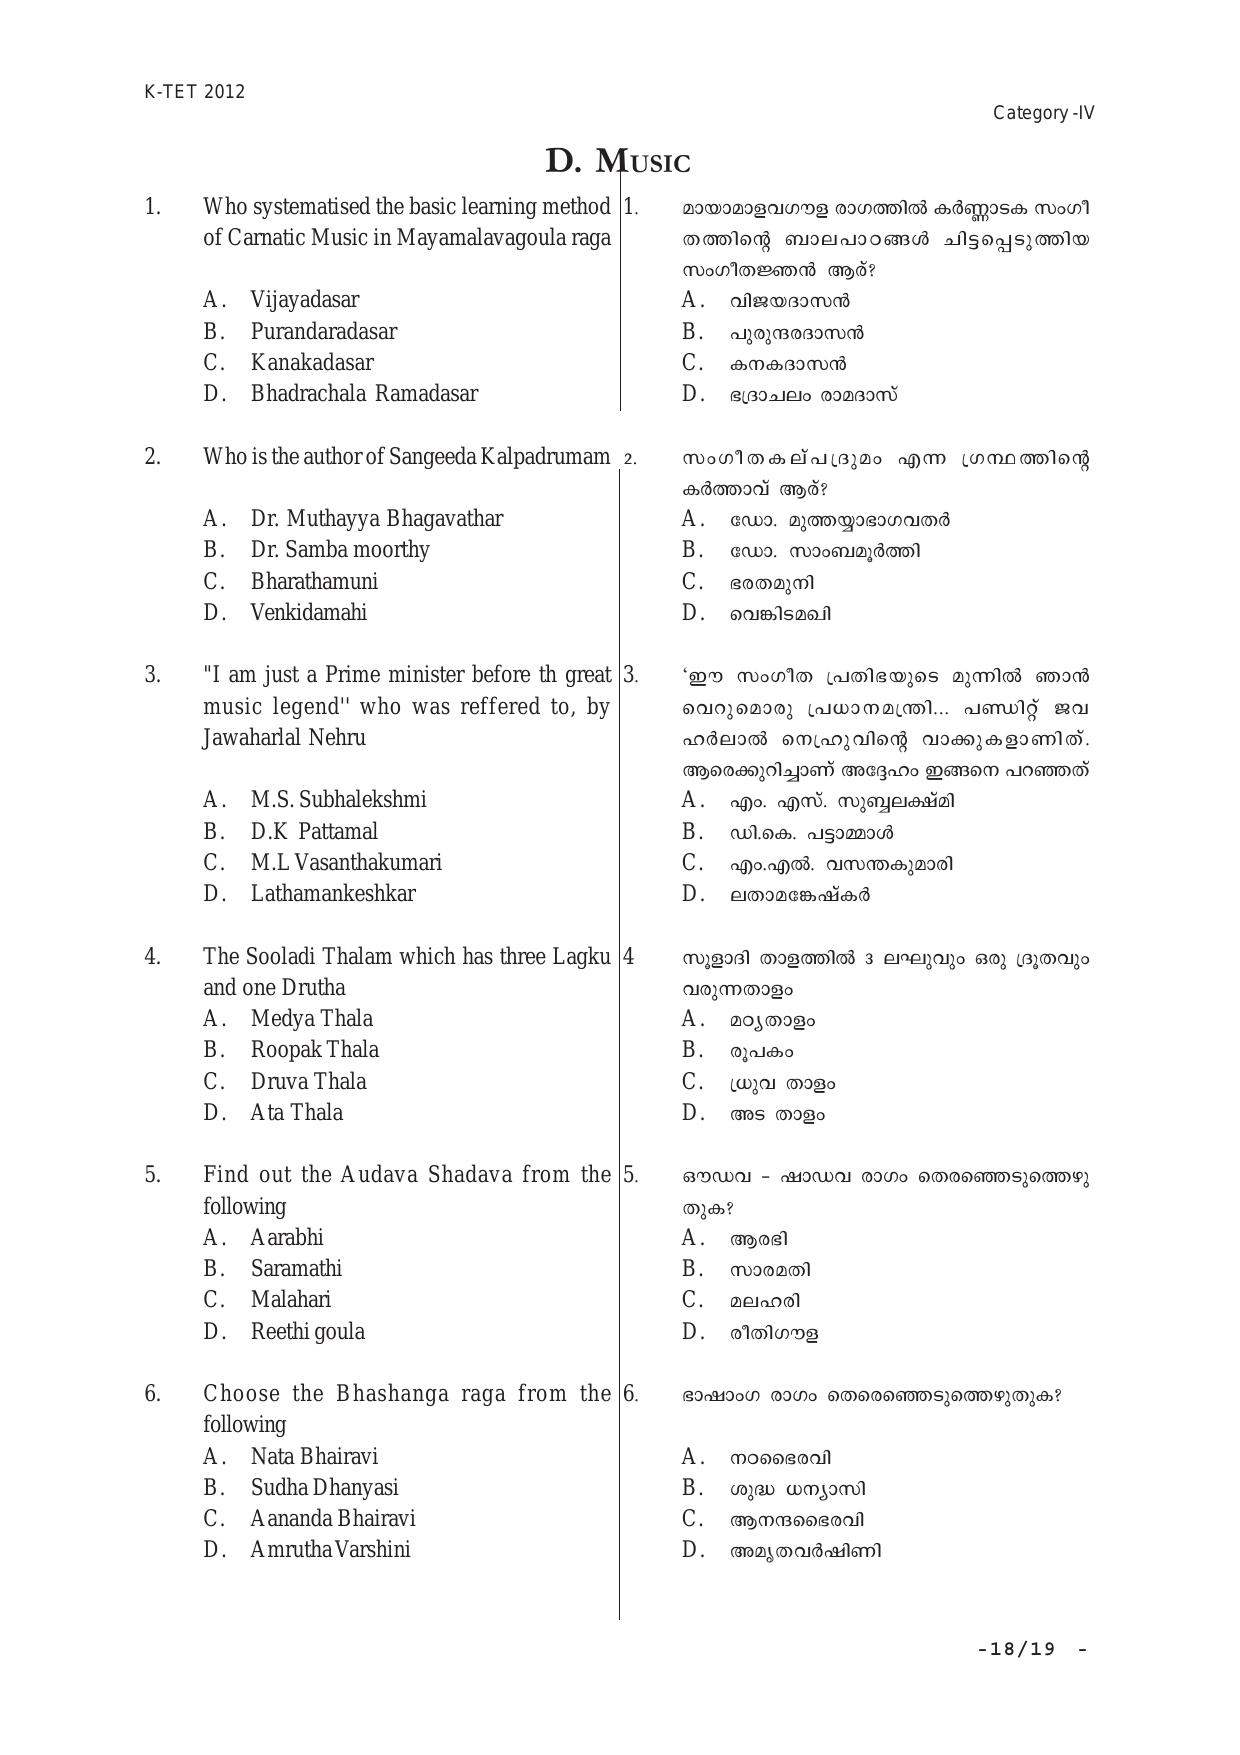 KTET Category IV (Languages (Up to Upper Primary Level), Specialist Teachers & Physical Education Teachers) Test Sample Papers - Page 18